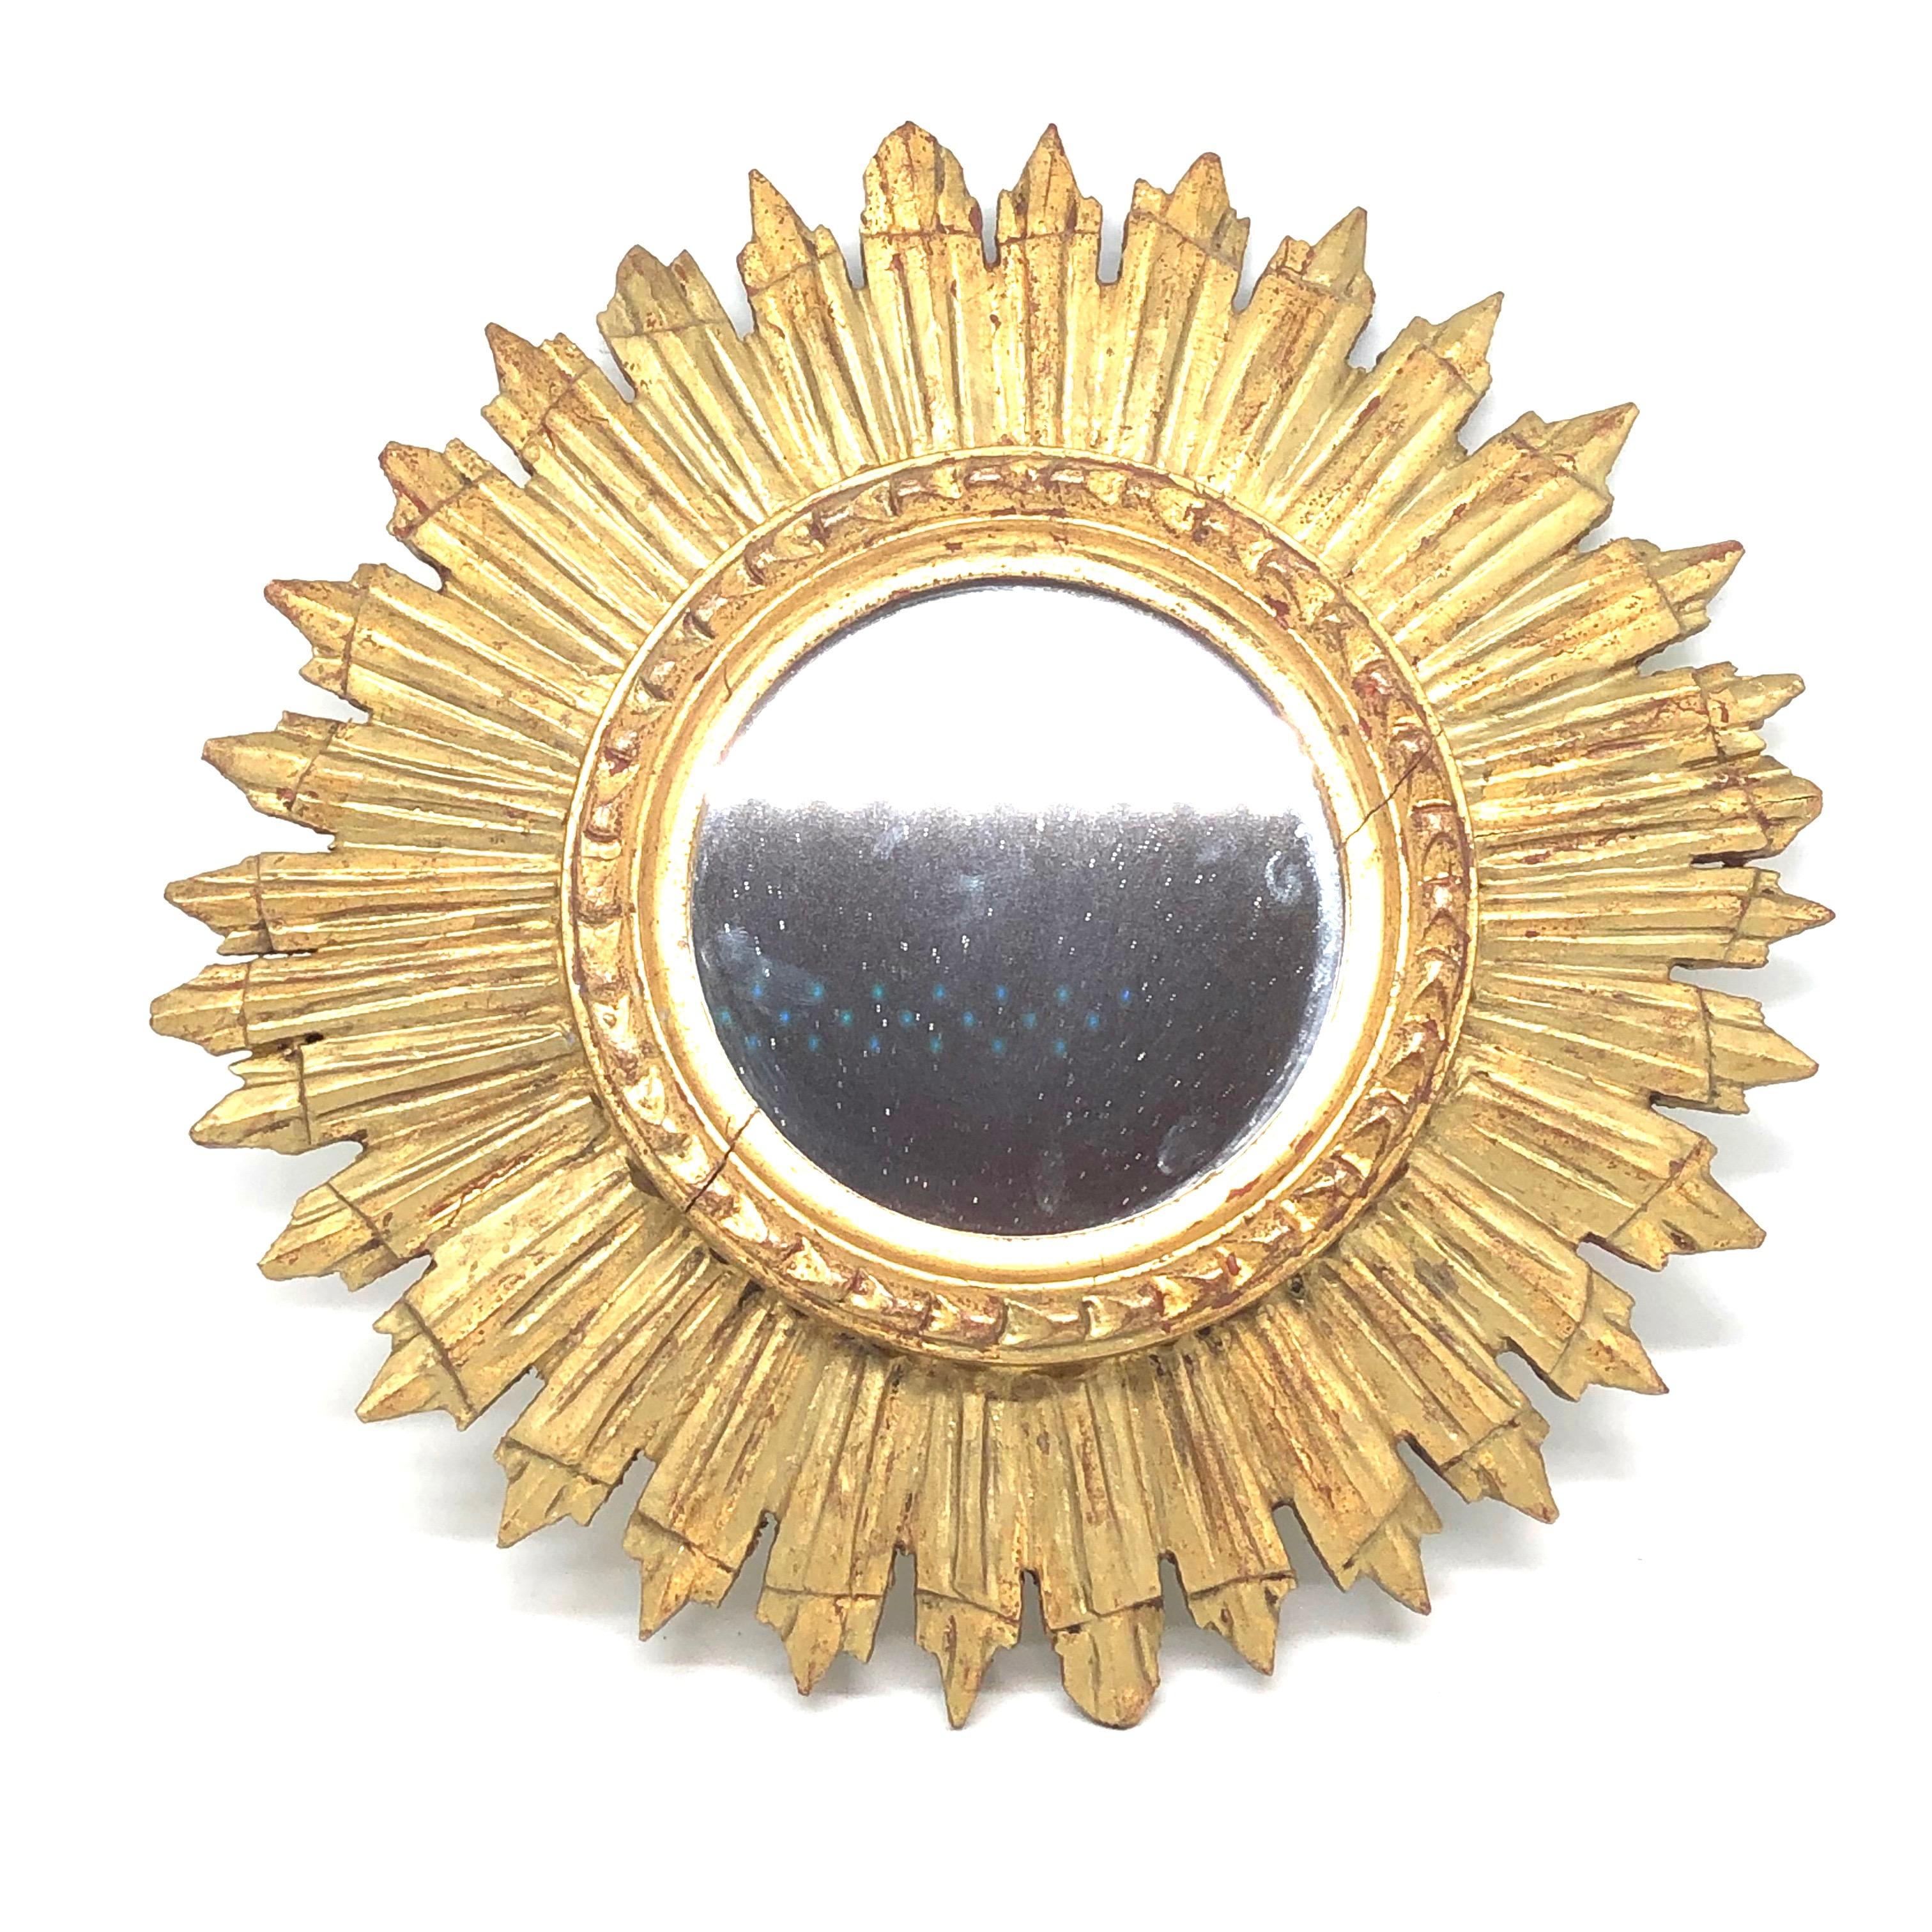 A gorgeous starburst sunburst mirror. Made of gilded wood. It measures approximate 12